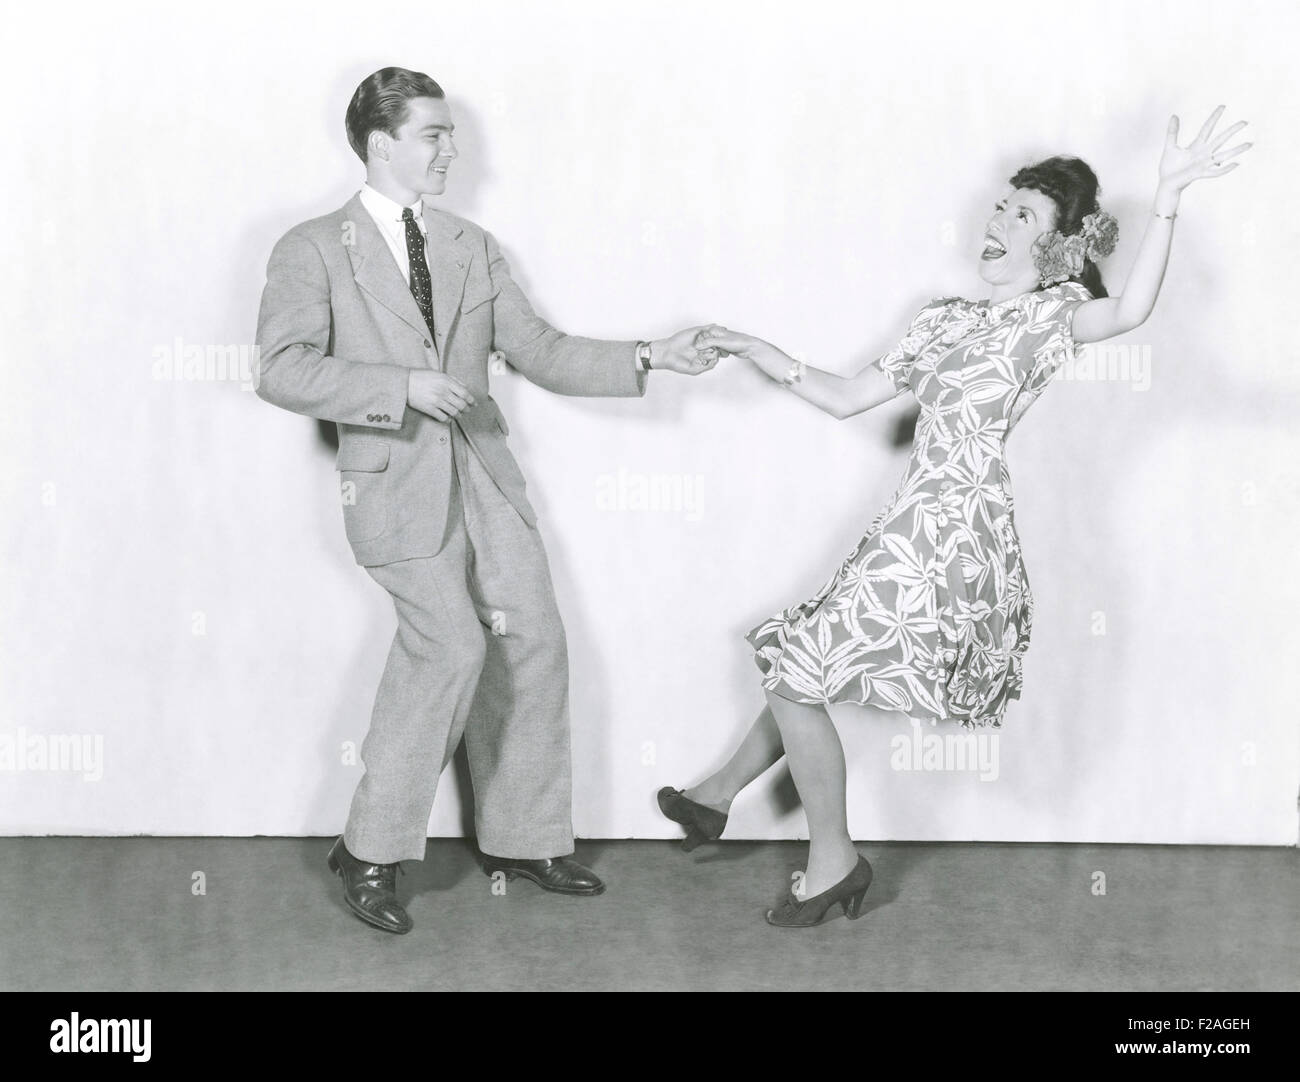 Swing Dance 1940s High Resolution Stock Photography and Images - Alamy